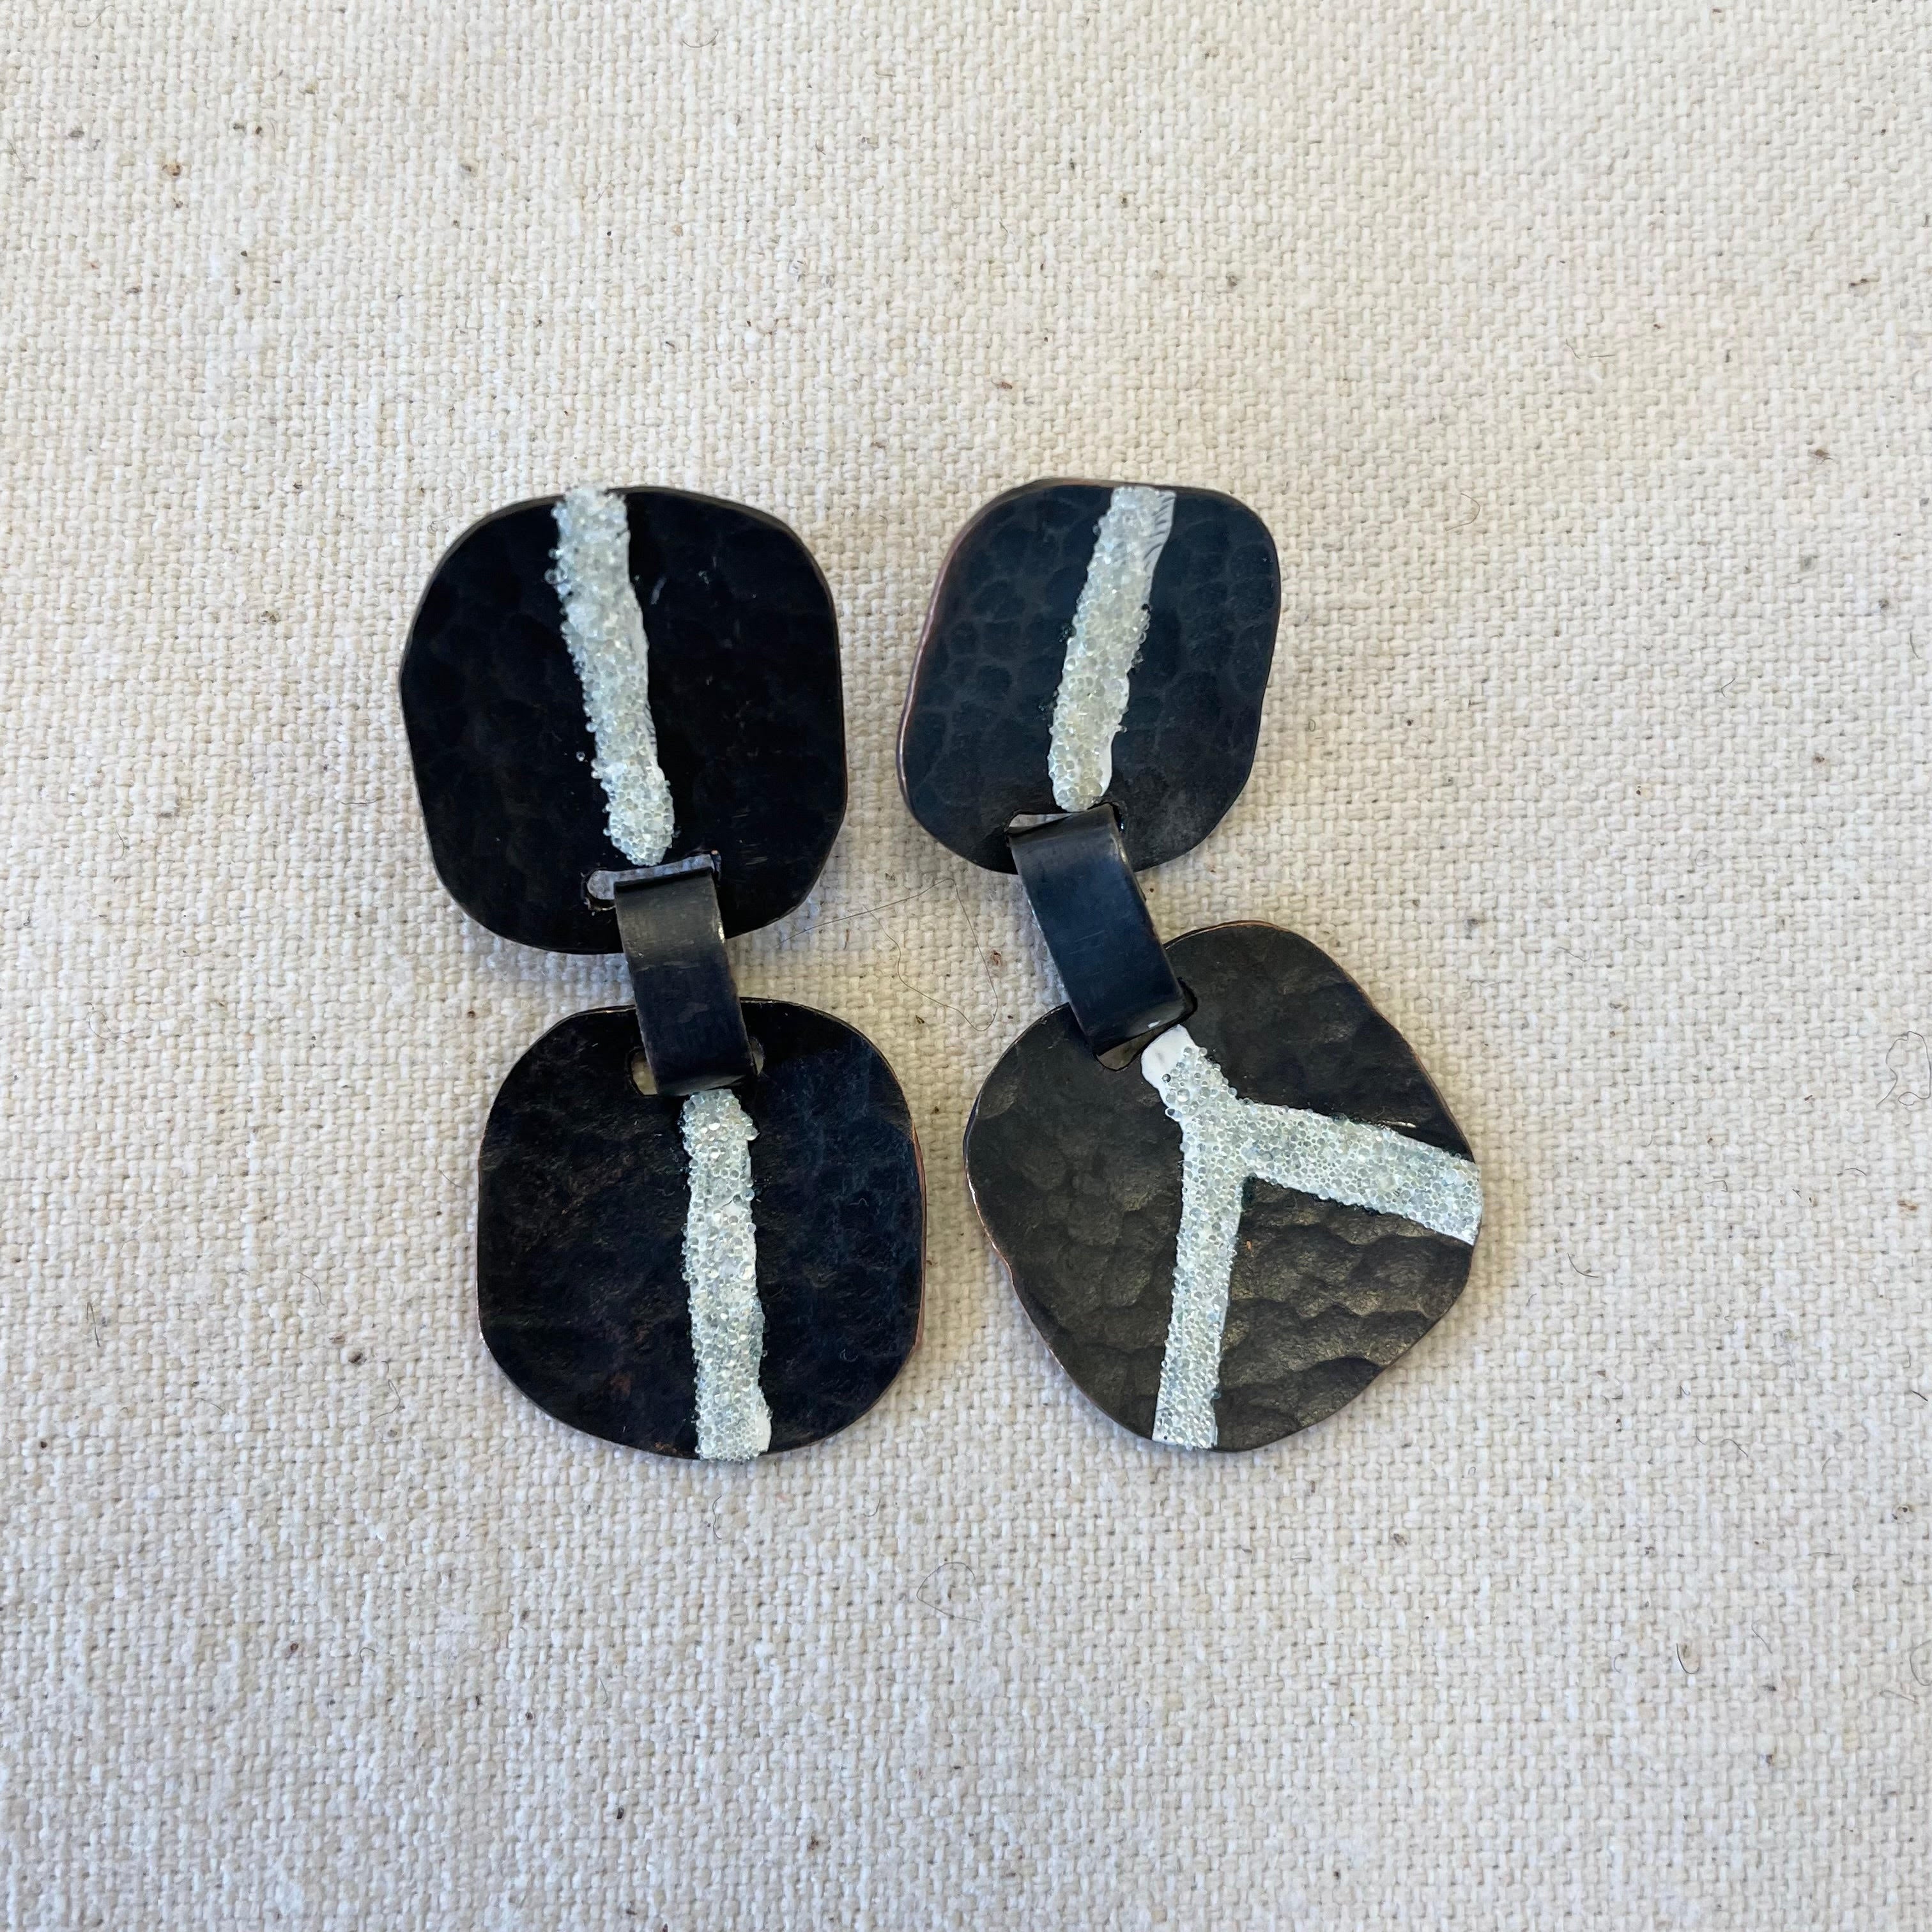 Earrings by Hilary Johnstone. Silver with reflective road marking beads in lines.